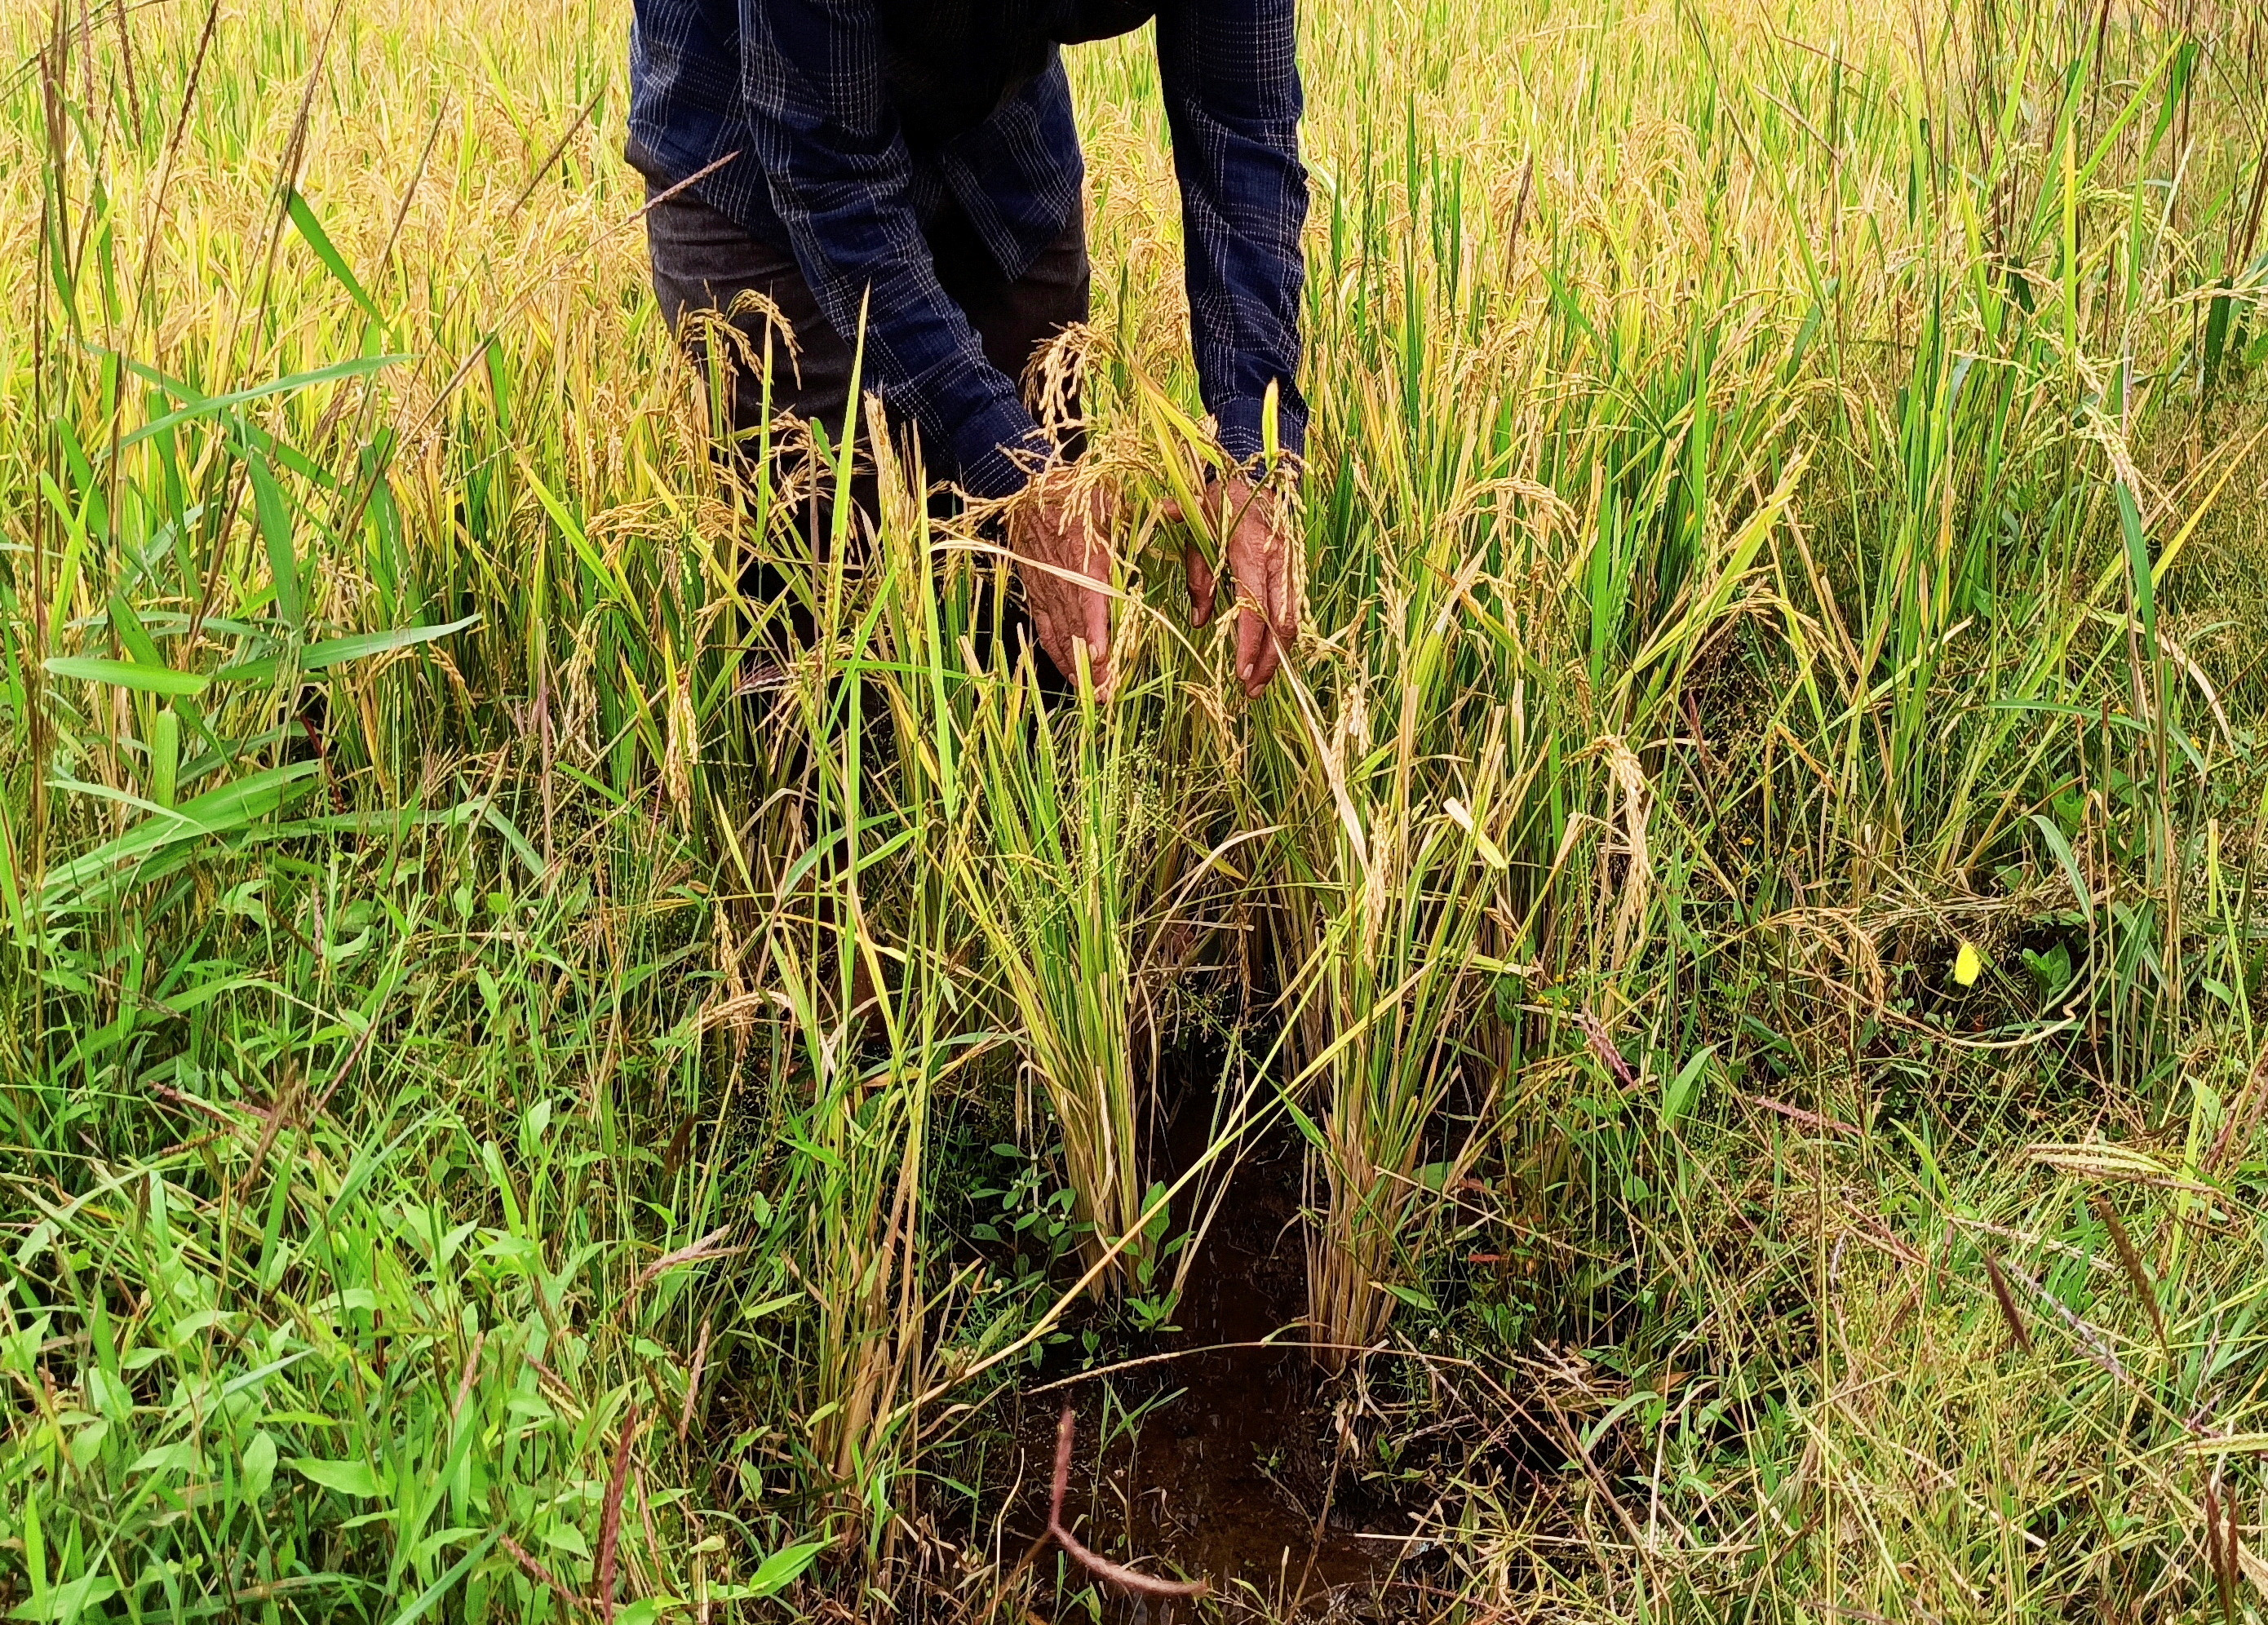 Ibrahim Shaikh shows his rice plants that he says were damaged by excessive rains in his field at Kadadhe village